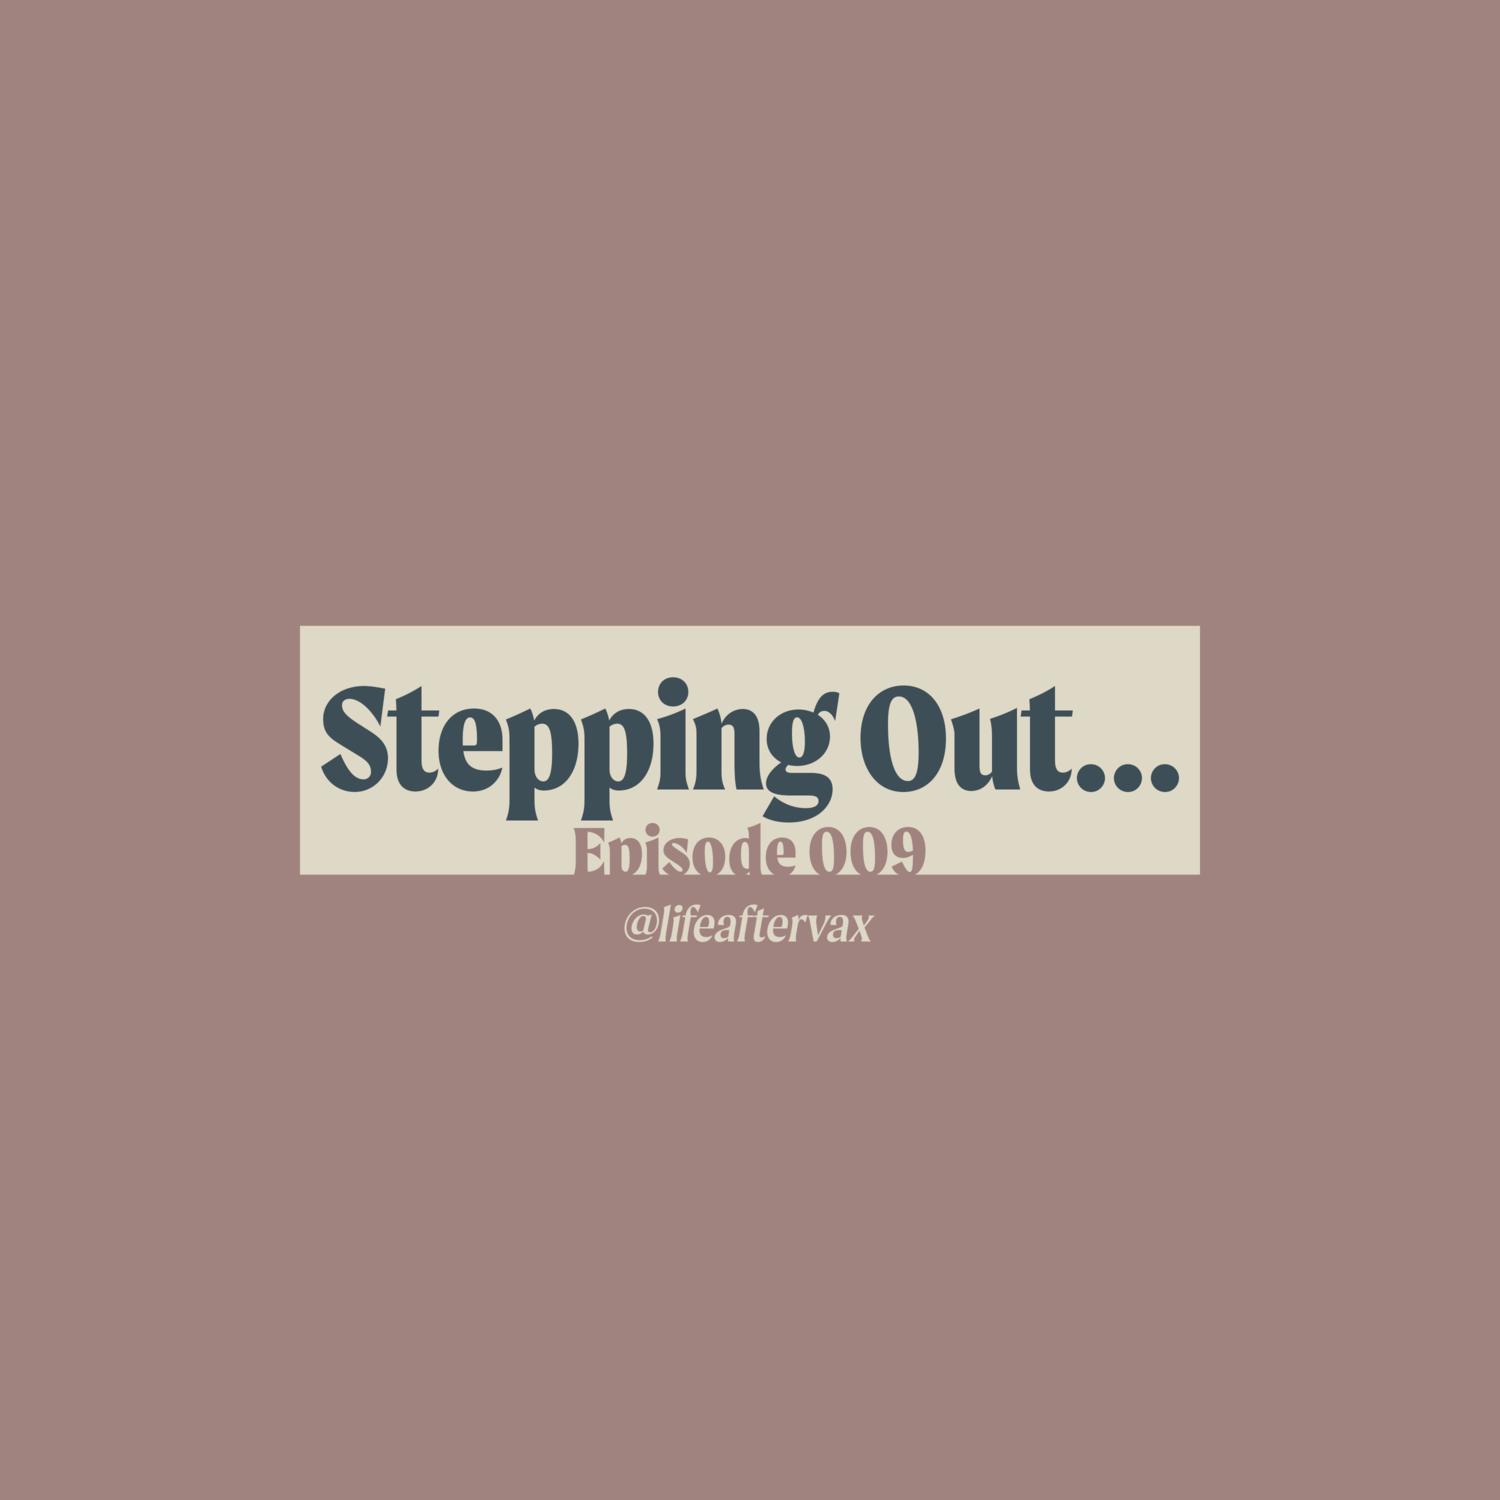 Episode 009 - Stepping Out...